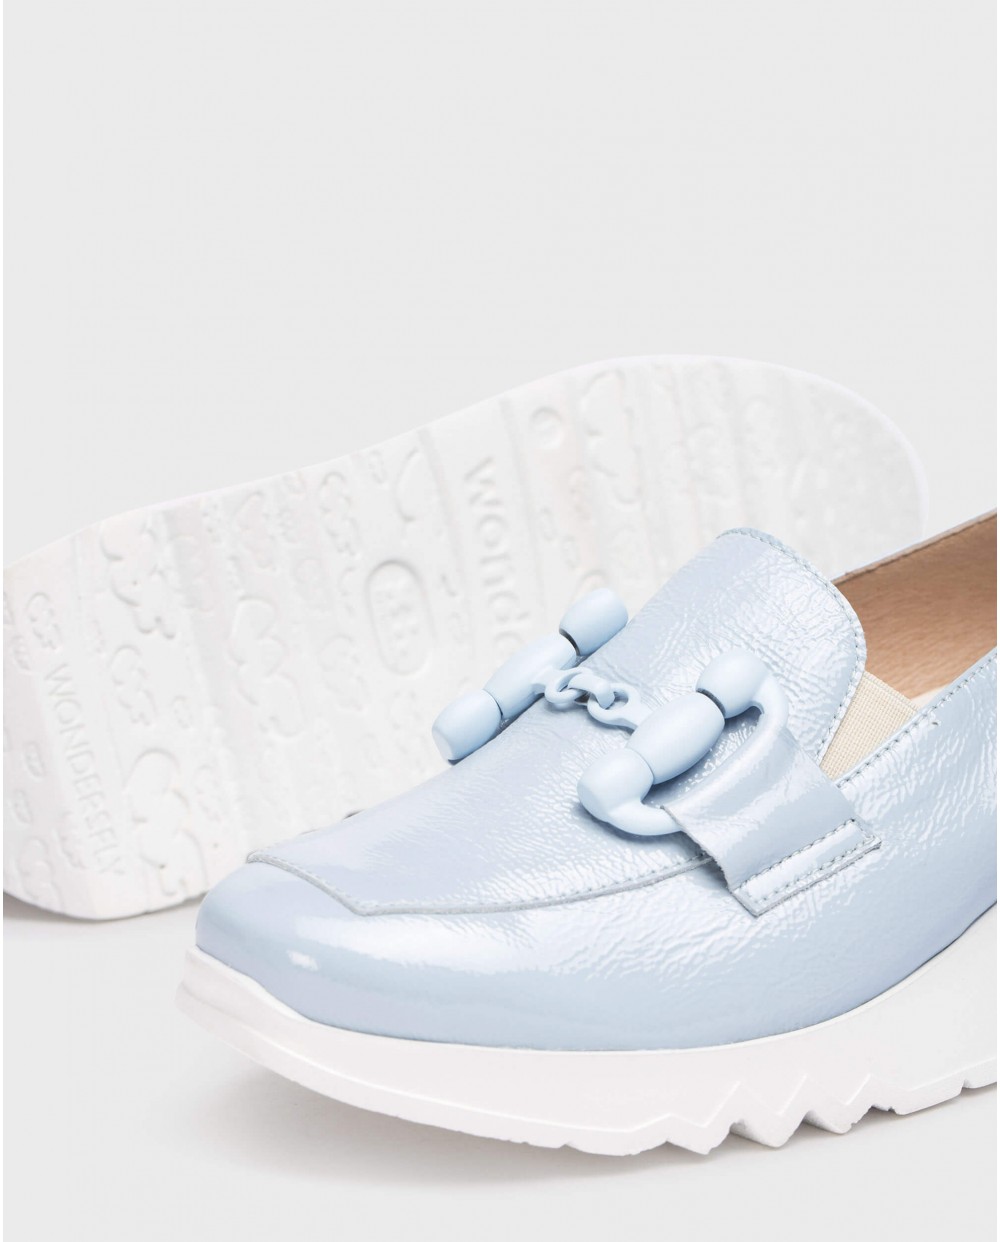 Wonders-Loafers-Blue Dance moccasin